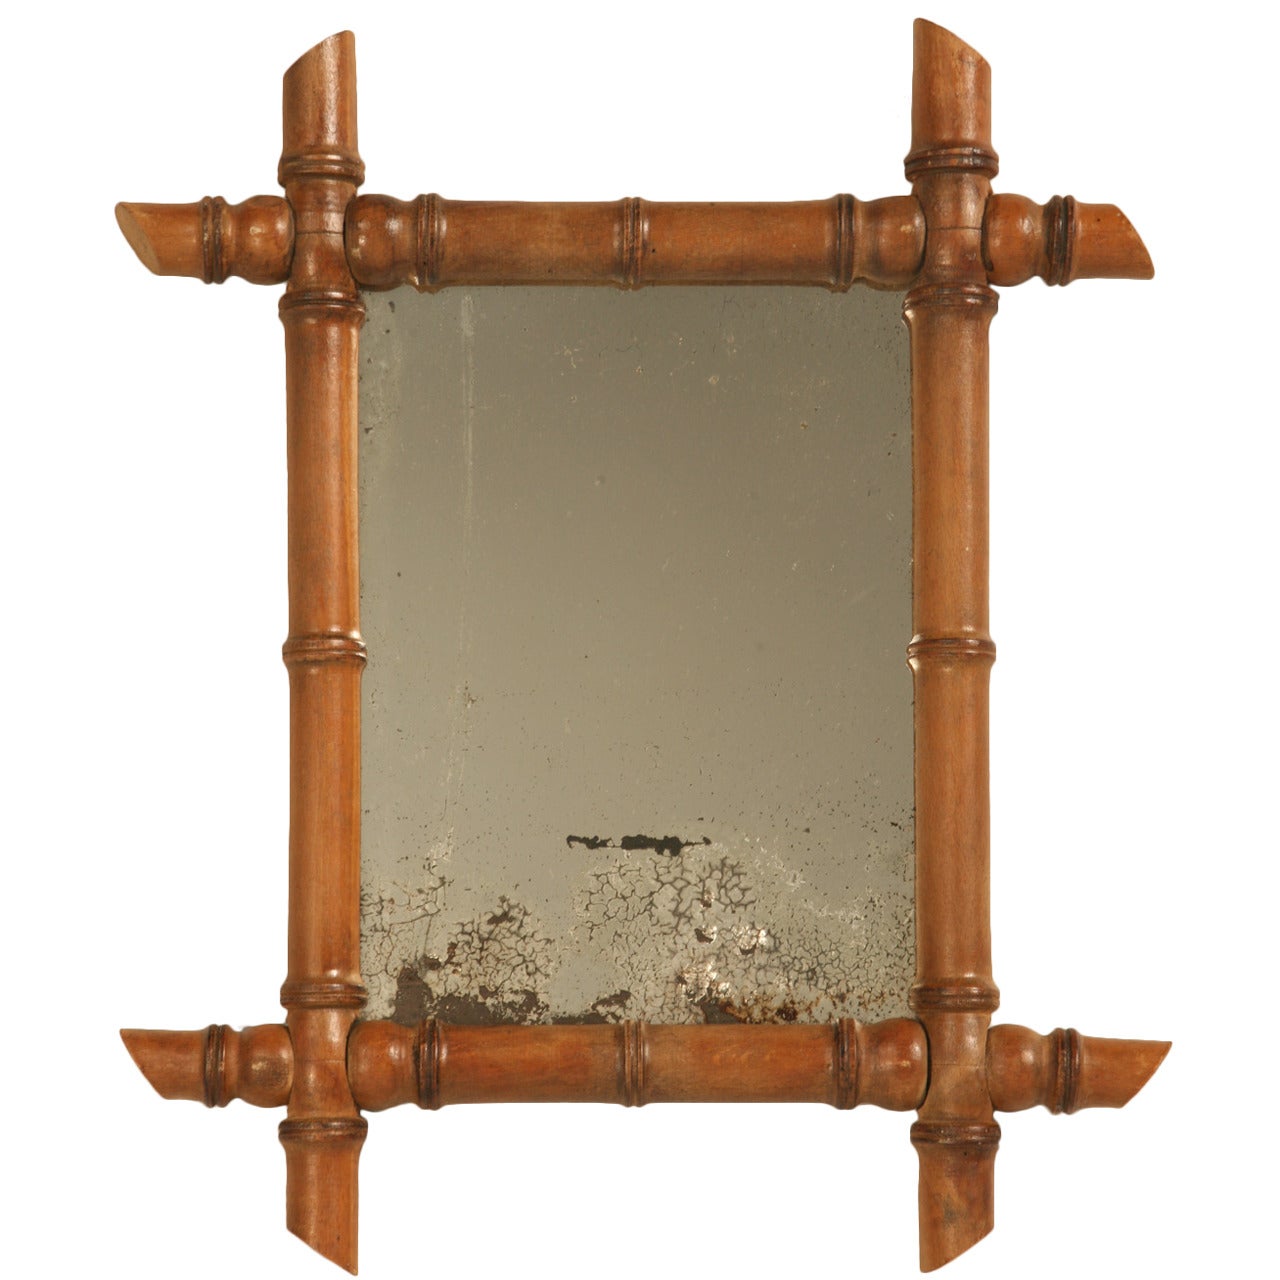 Petite Antique Continental Mirror in Faux Bamboo Frame Original Patina Glass